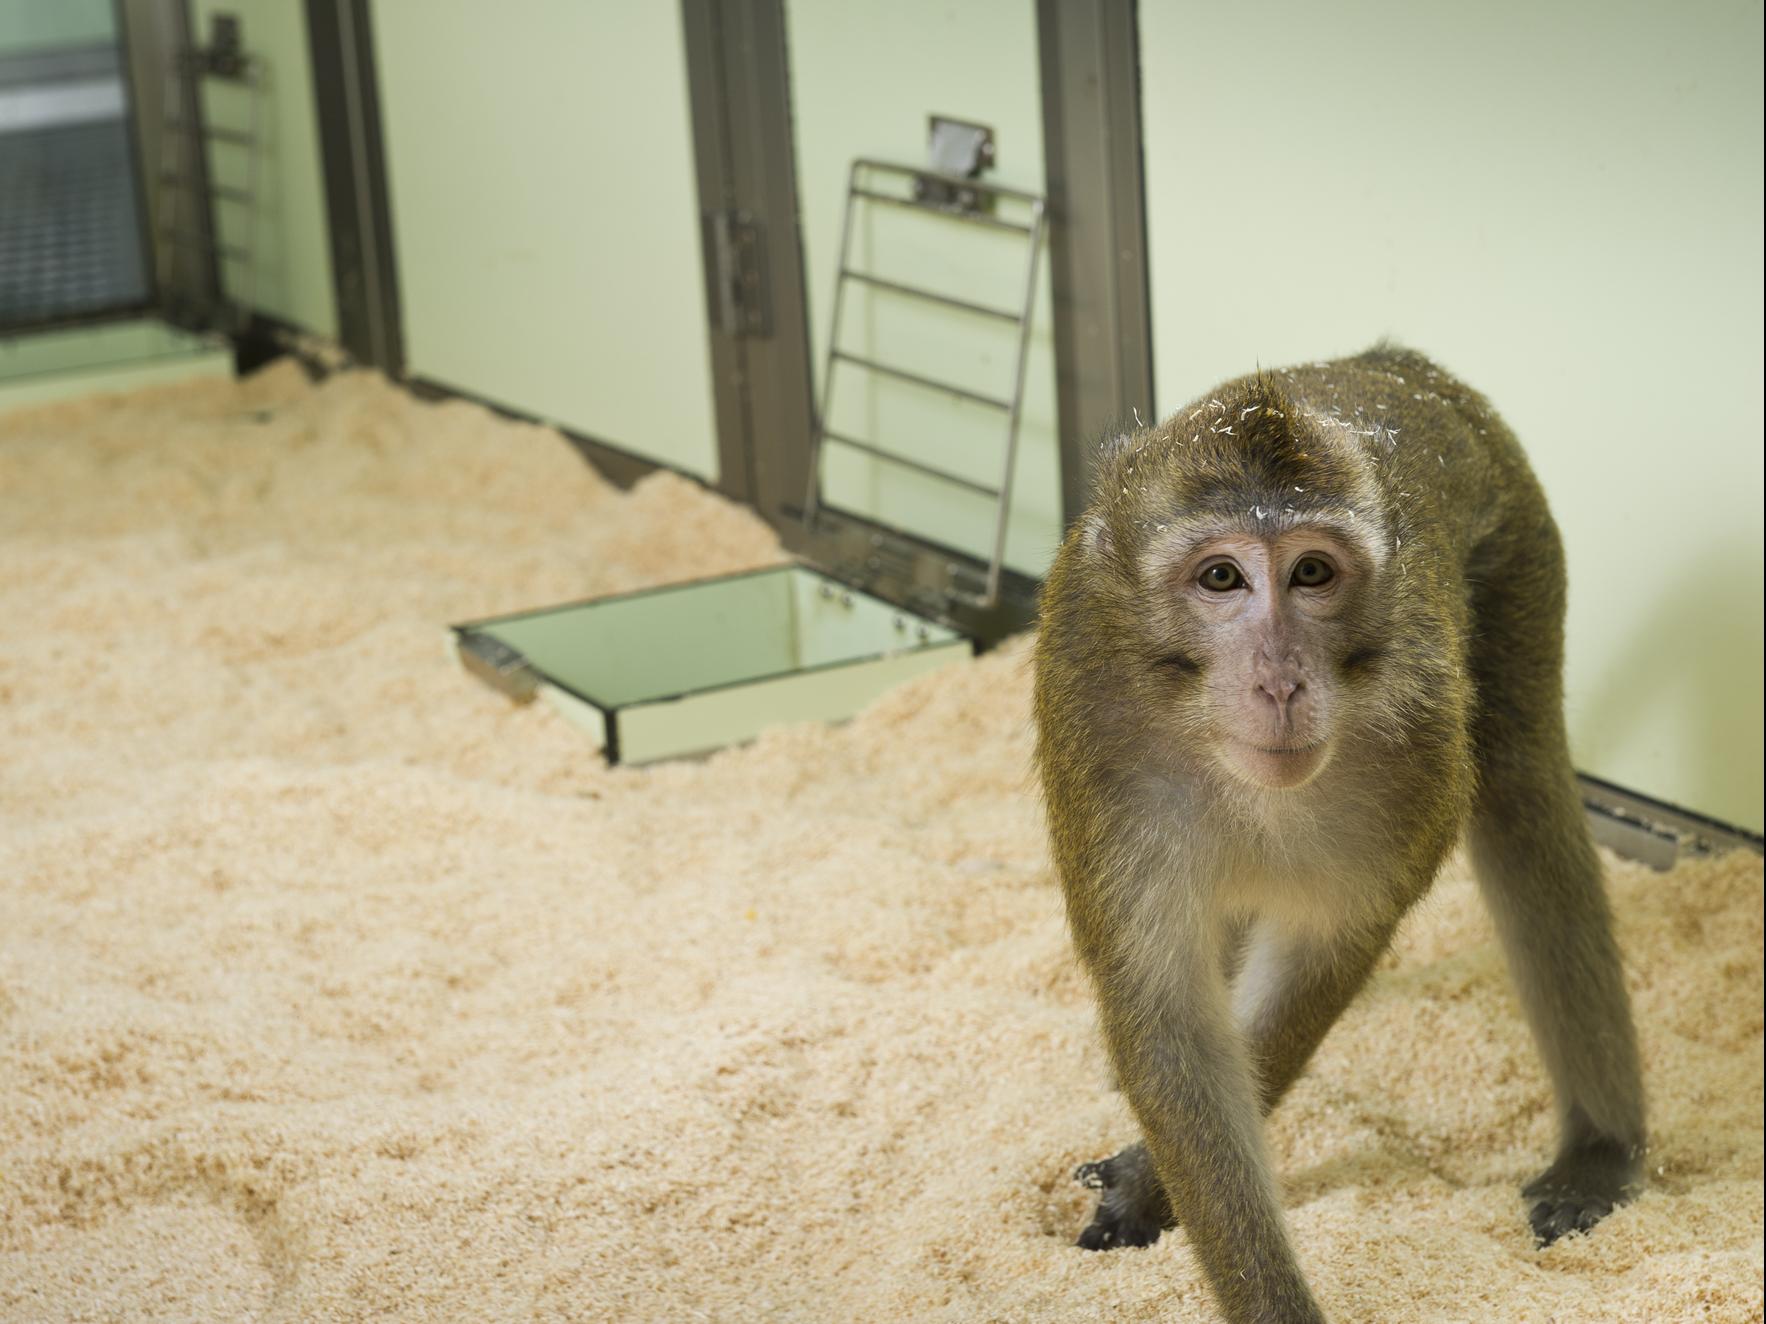 A cynomolgus macaque in it's enclosure with floor substrate, such as soft wood shavings, improve cleaning regimes, as they absorb urine and faeces and avoid the need for wet cleaning daily.